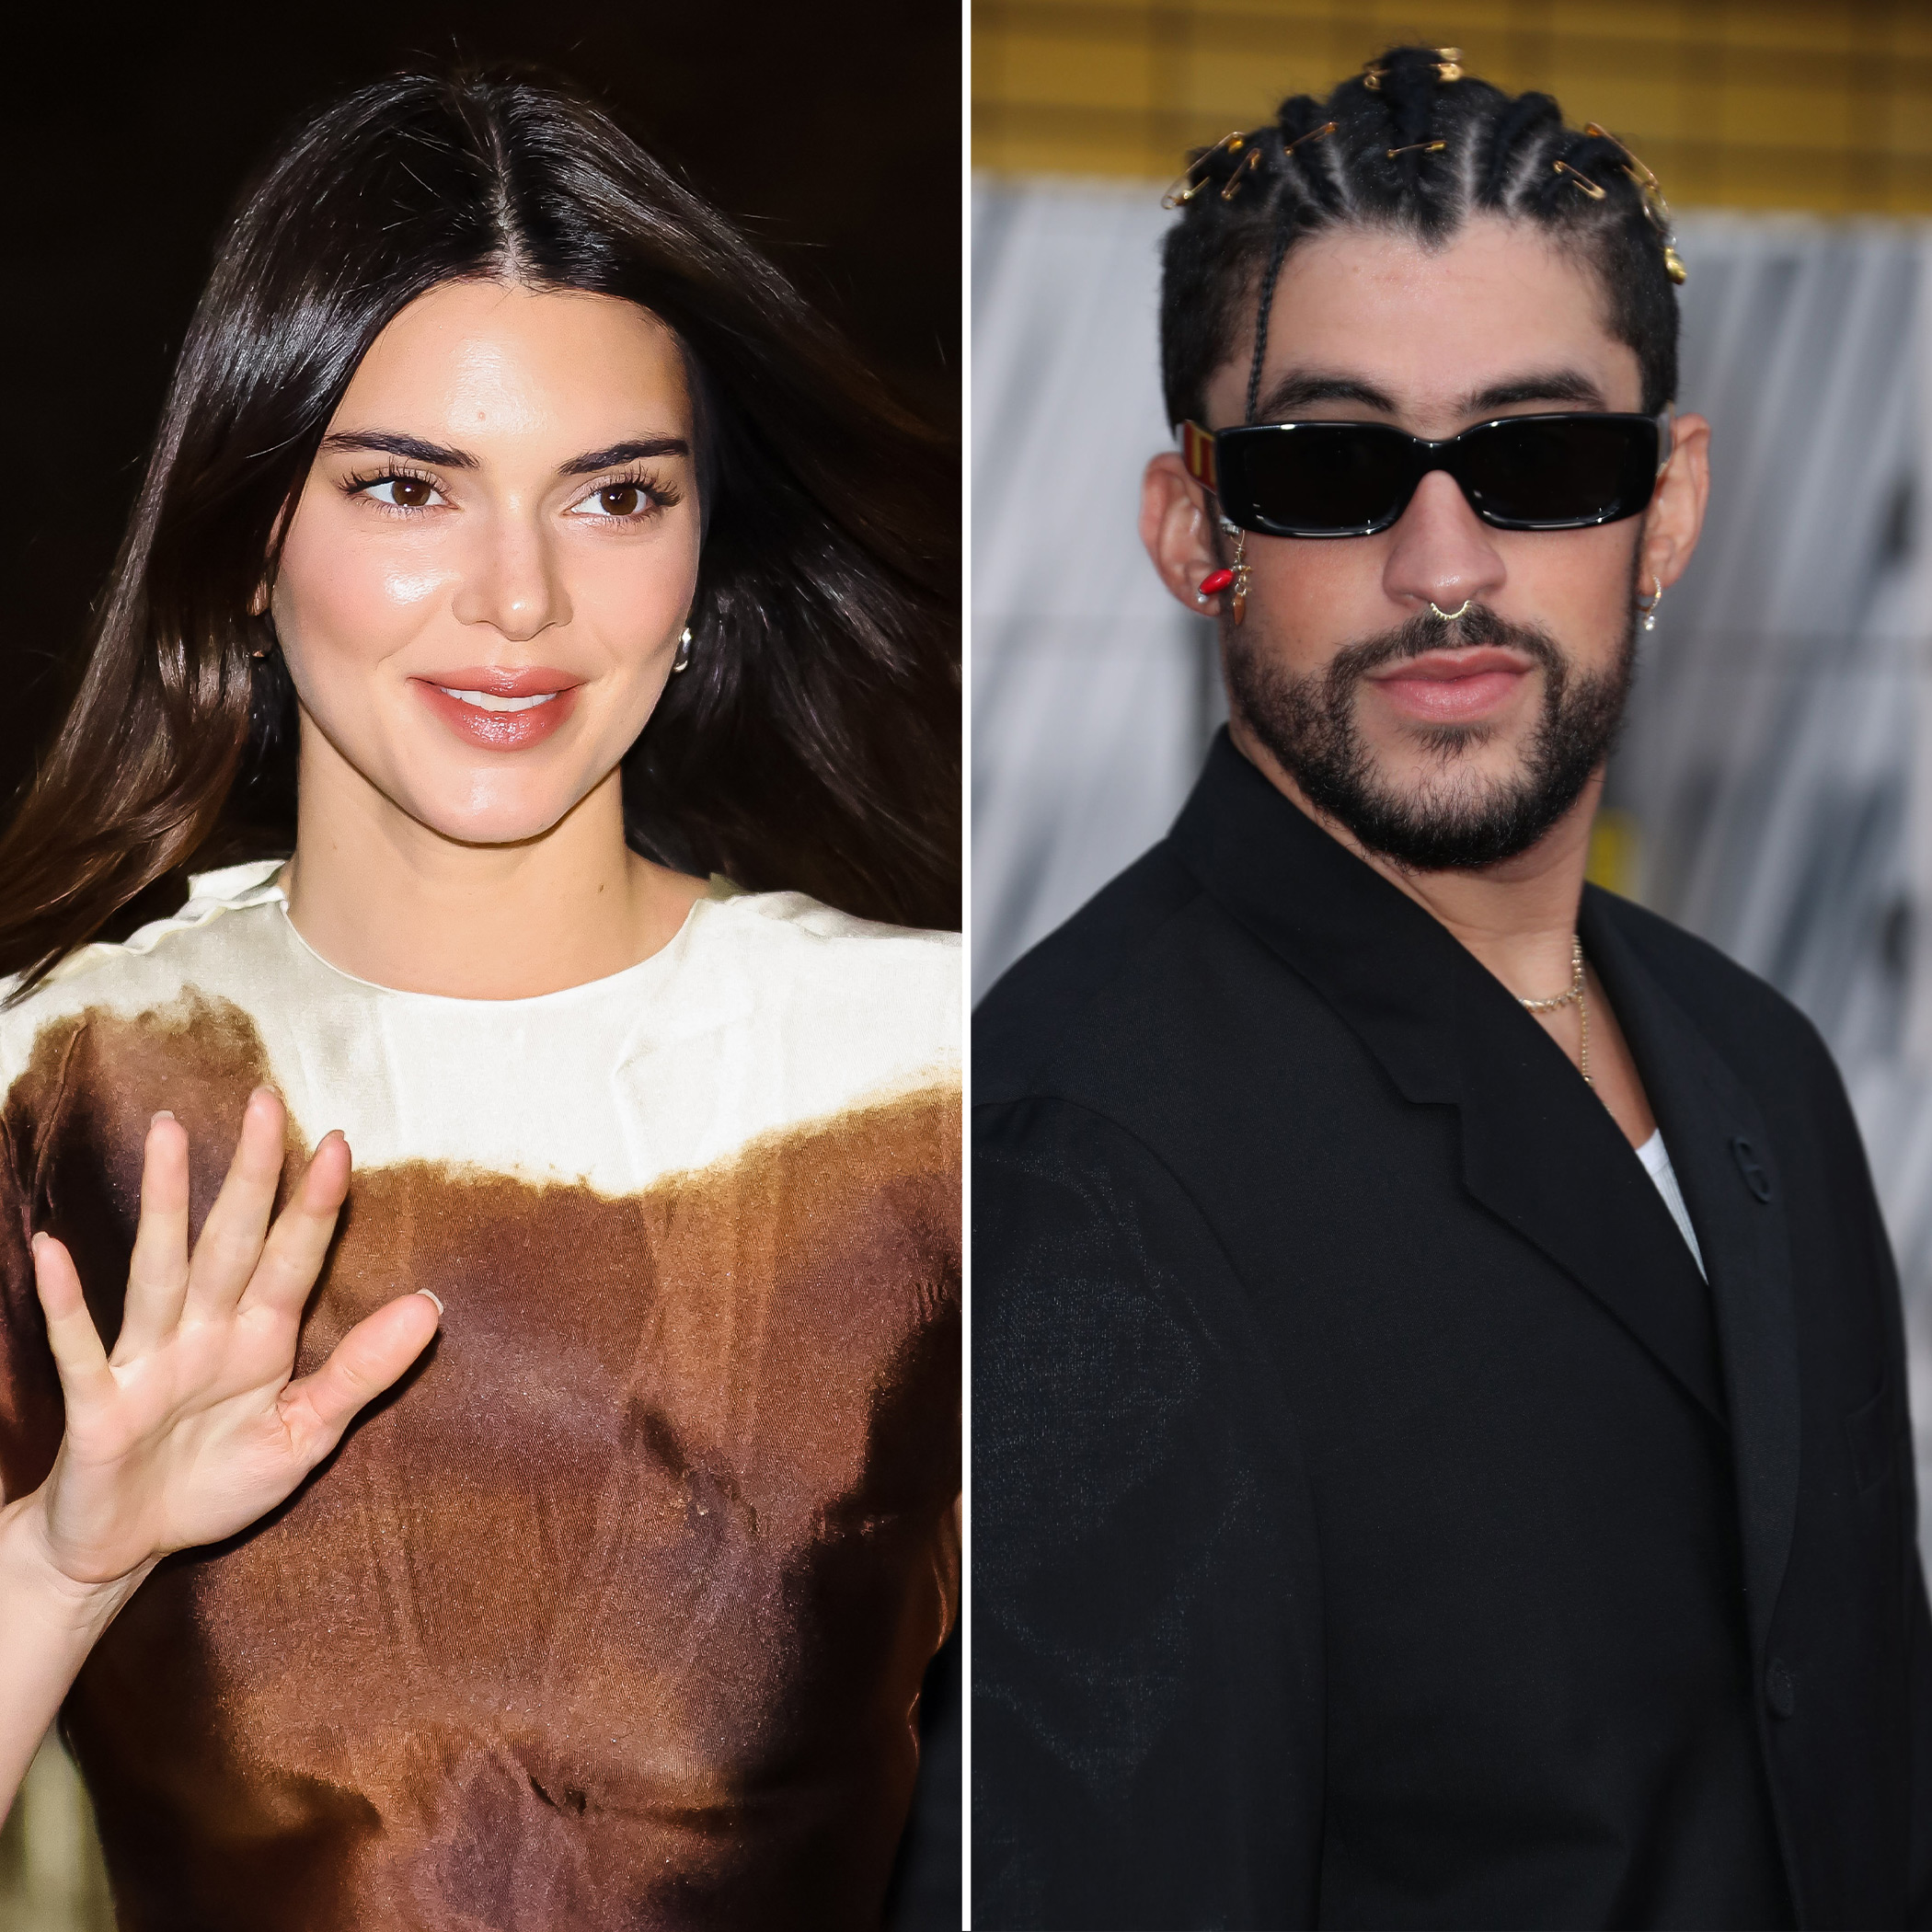 Kendall Jenner and Bad Bunny Go Instagram Official in New Gucci